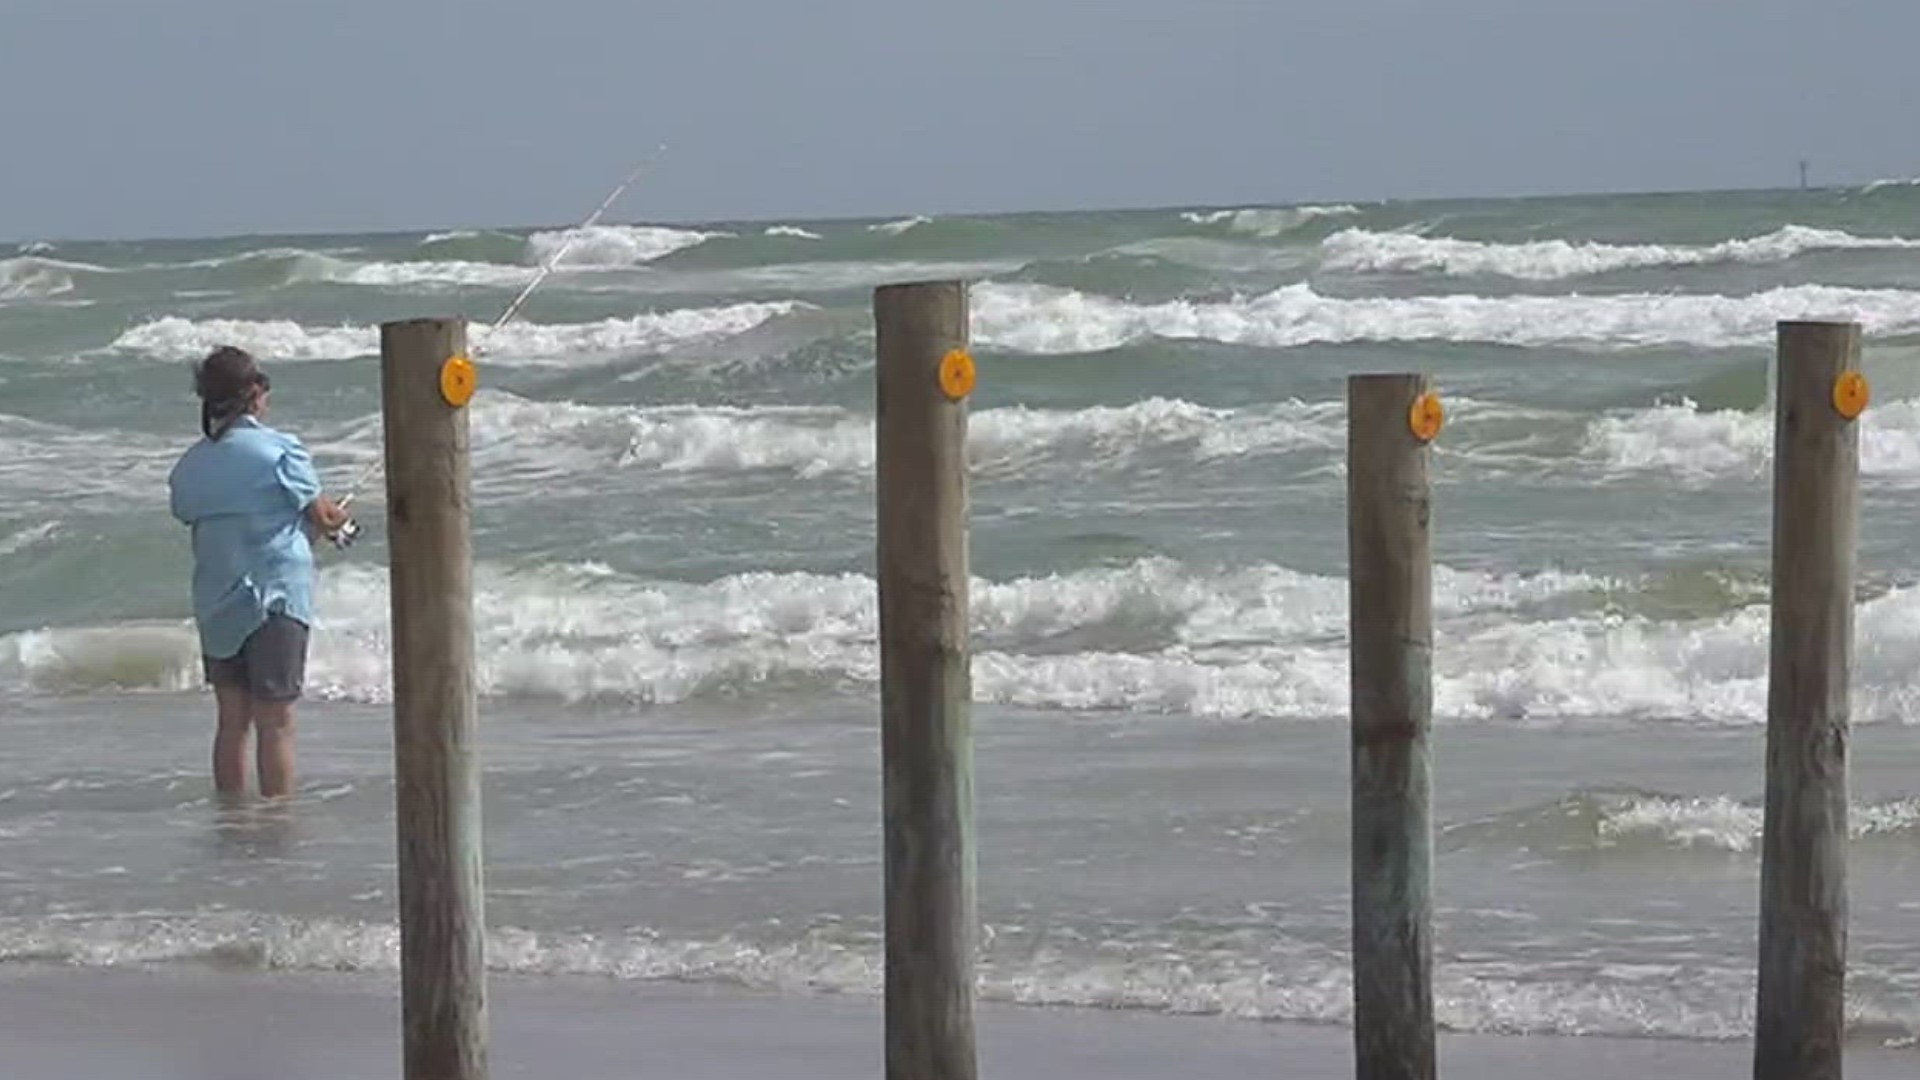 3NEWS is following along with the city's dredging and "beach nourishment" project, which they say will give the public more space to access and enjoy the shore.